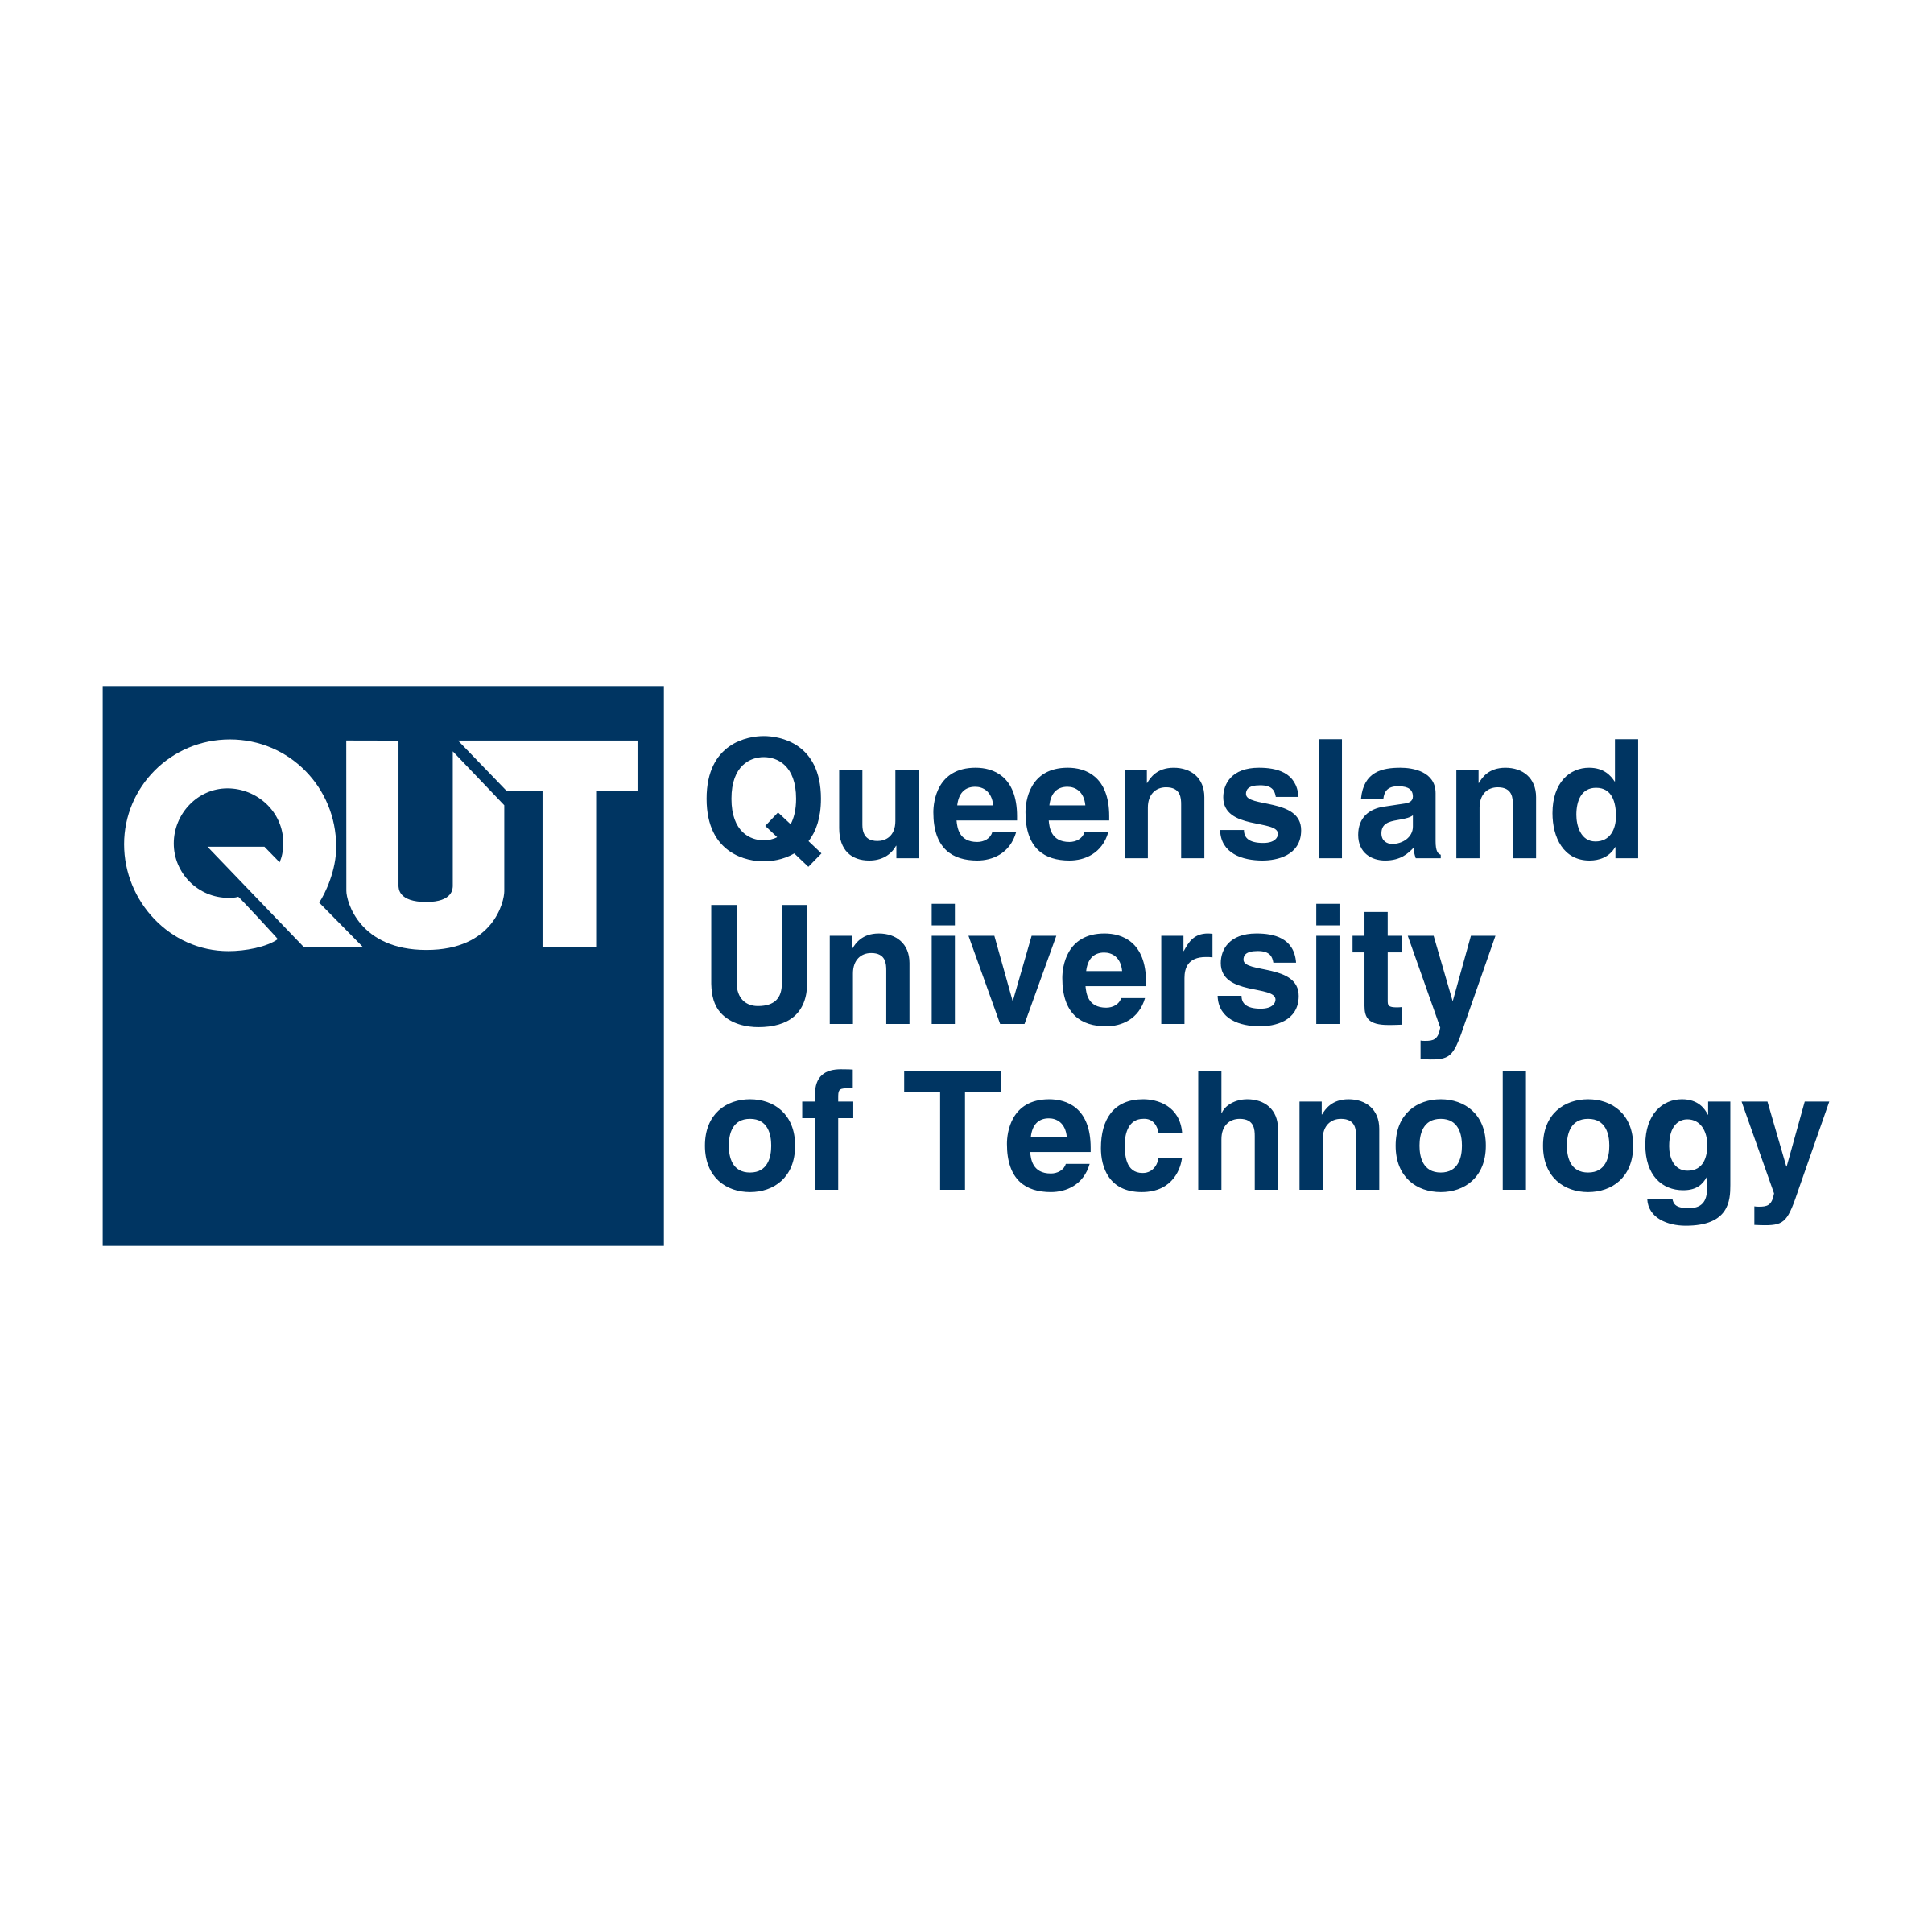 Bachelor of Nursing/Bachelor of Behavioural Science (Psychology) | Bachelor's degree | Health & Well-Being | On Campus | 4 years | Queensland University of Technology | Australia